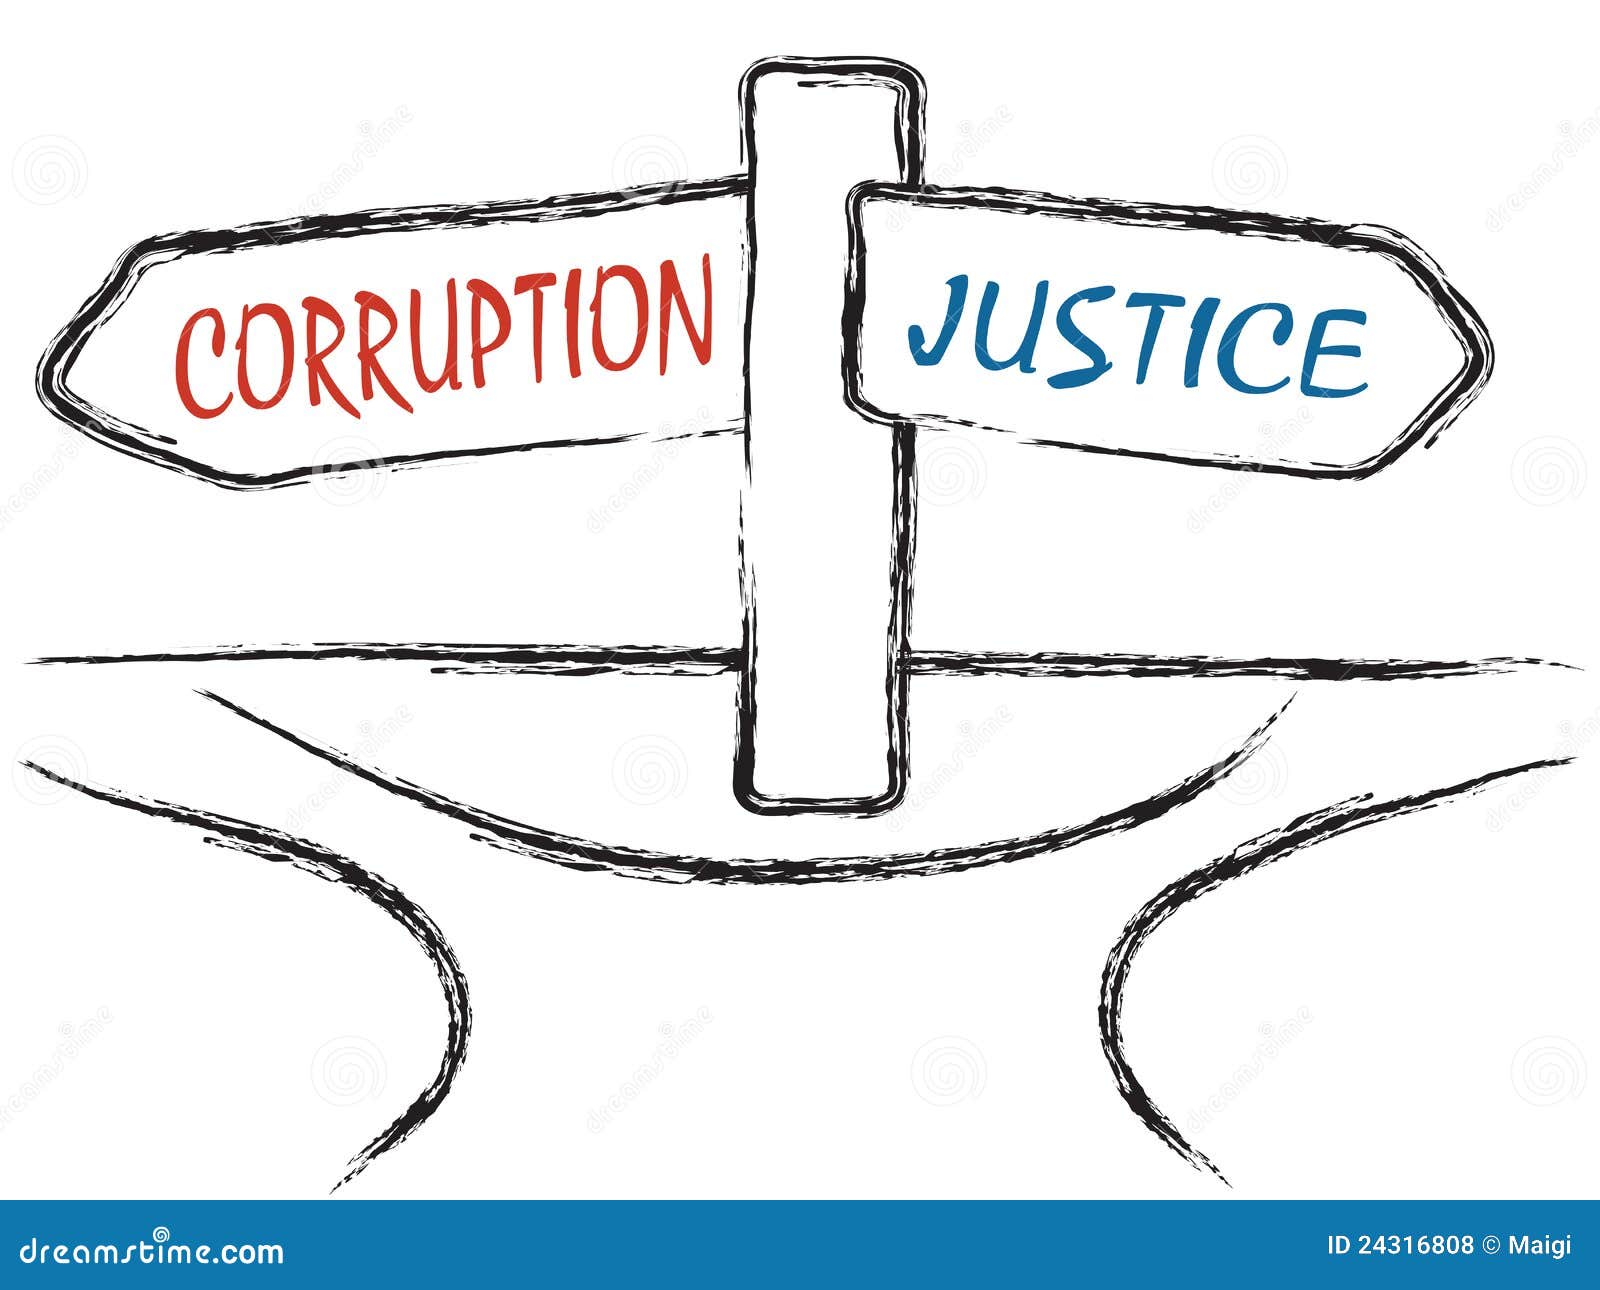 corruption and justice